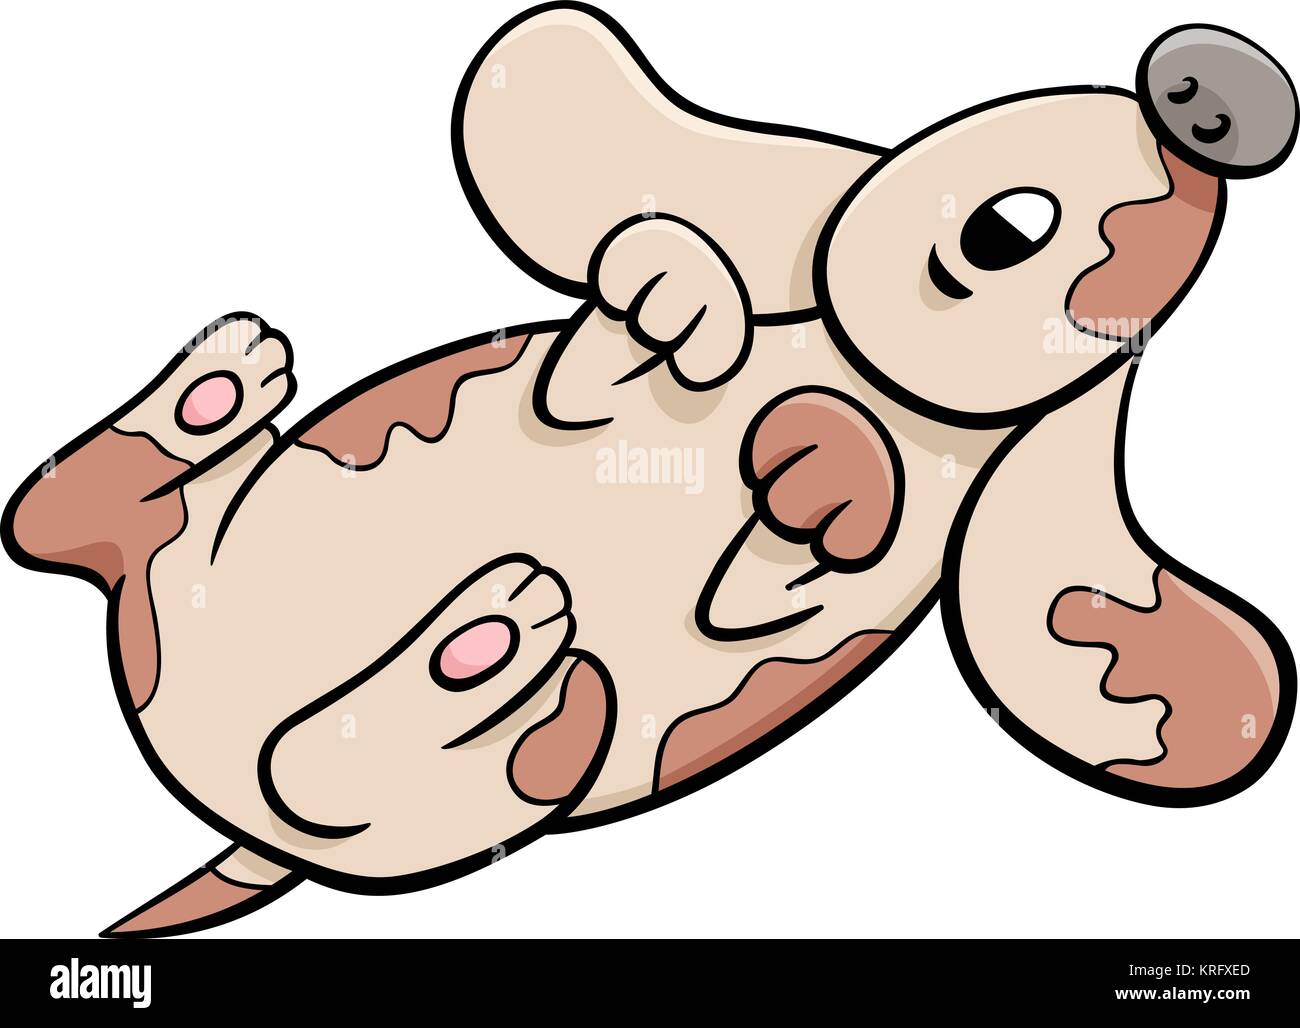 Cartoon Illustration of Cute Little Dog or Puppy Animal Character Stock Vector